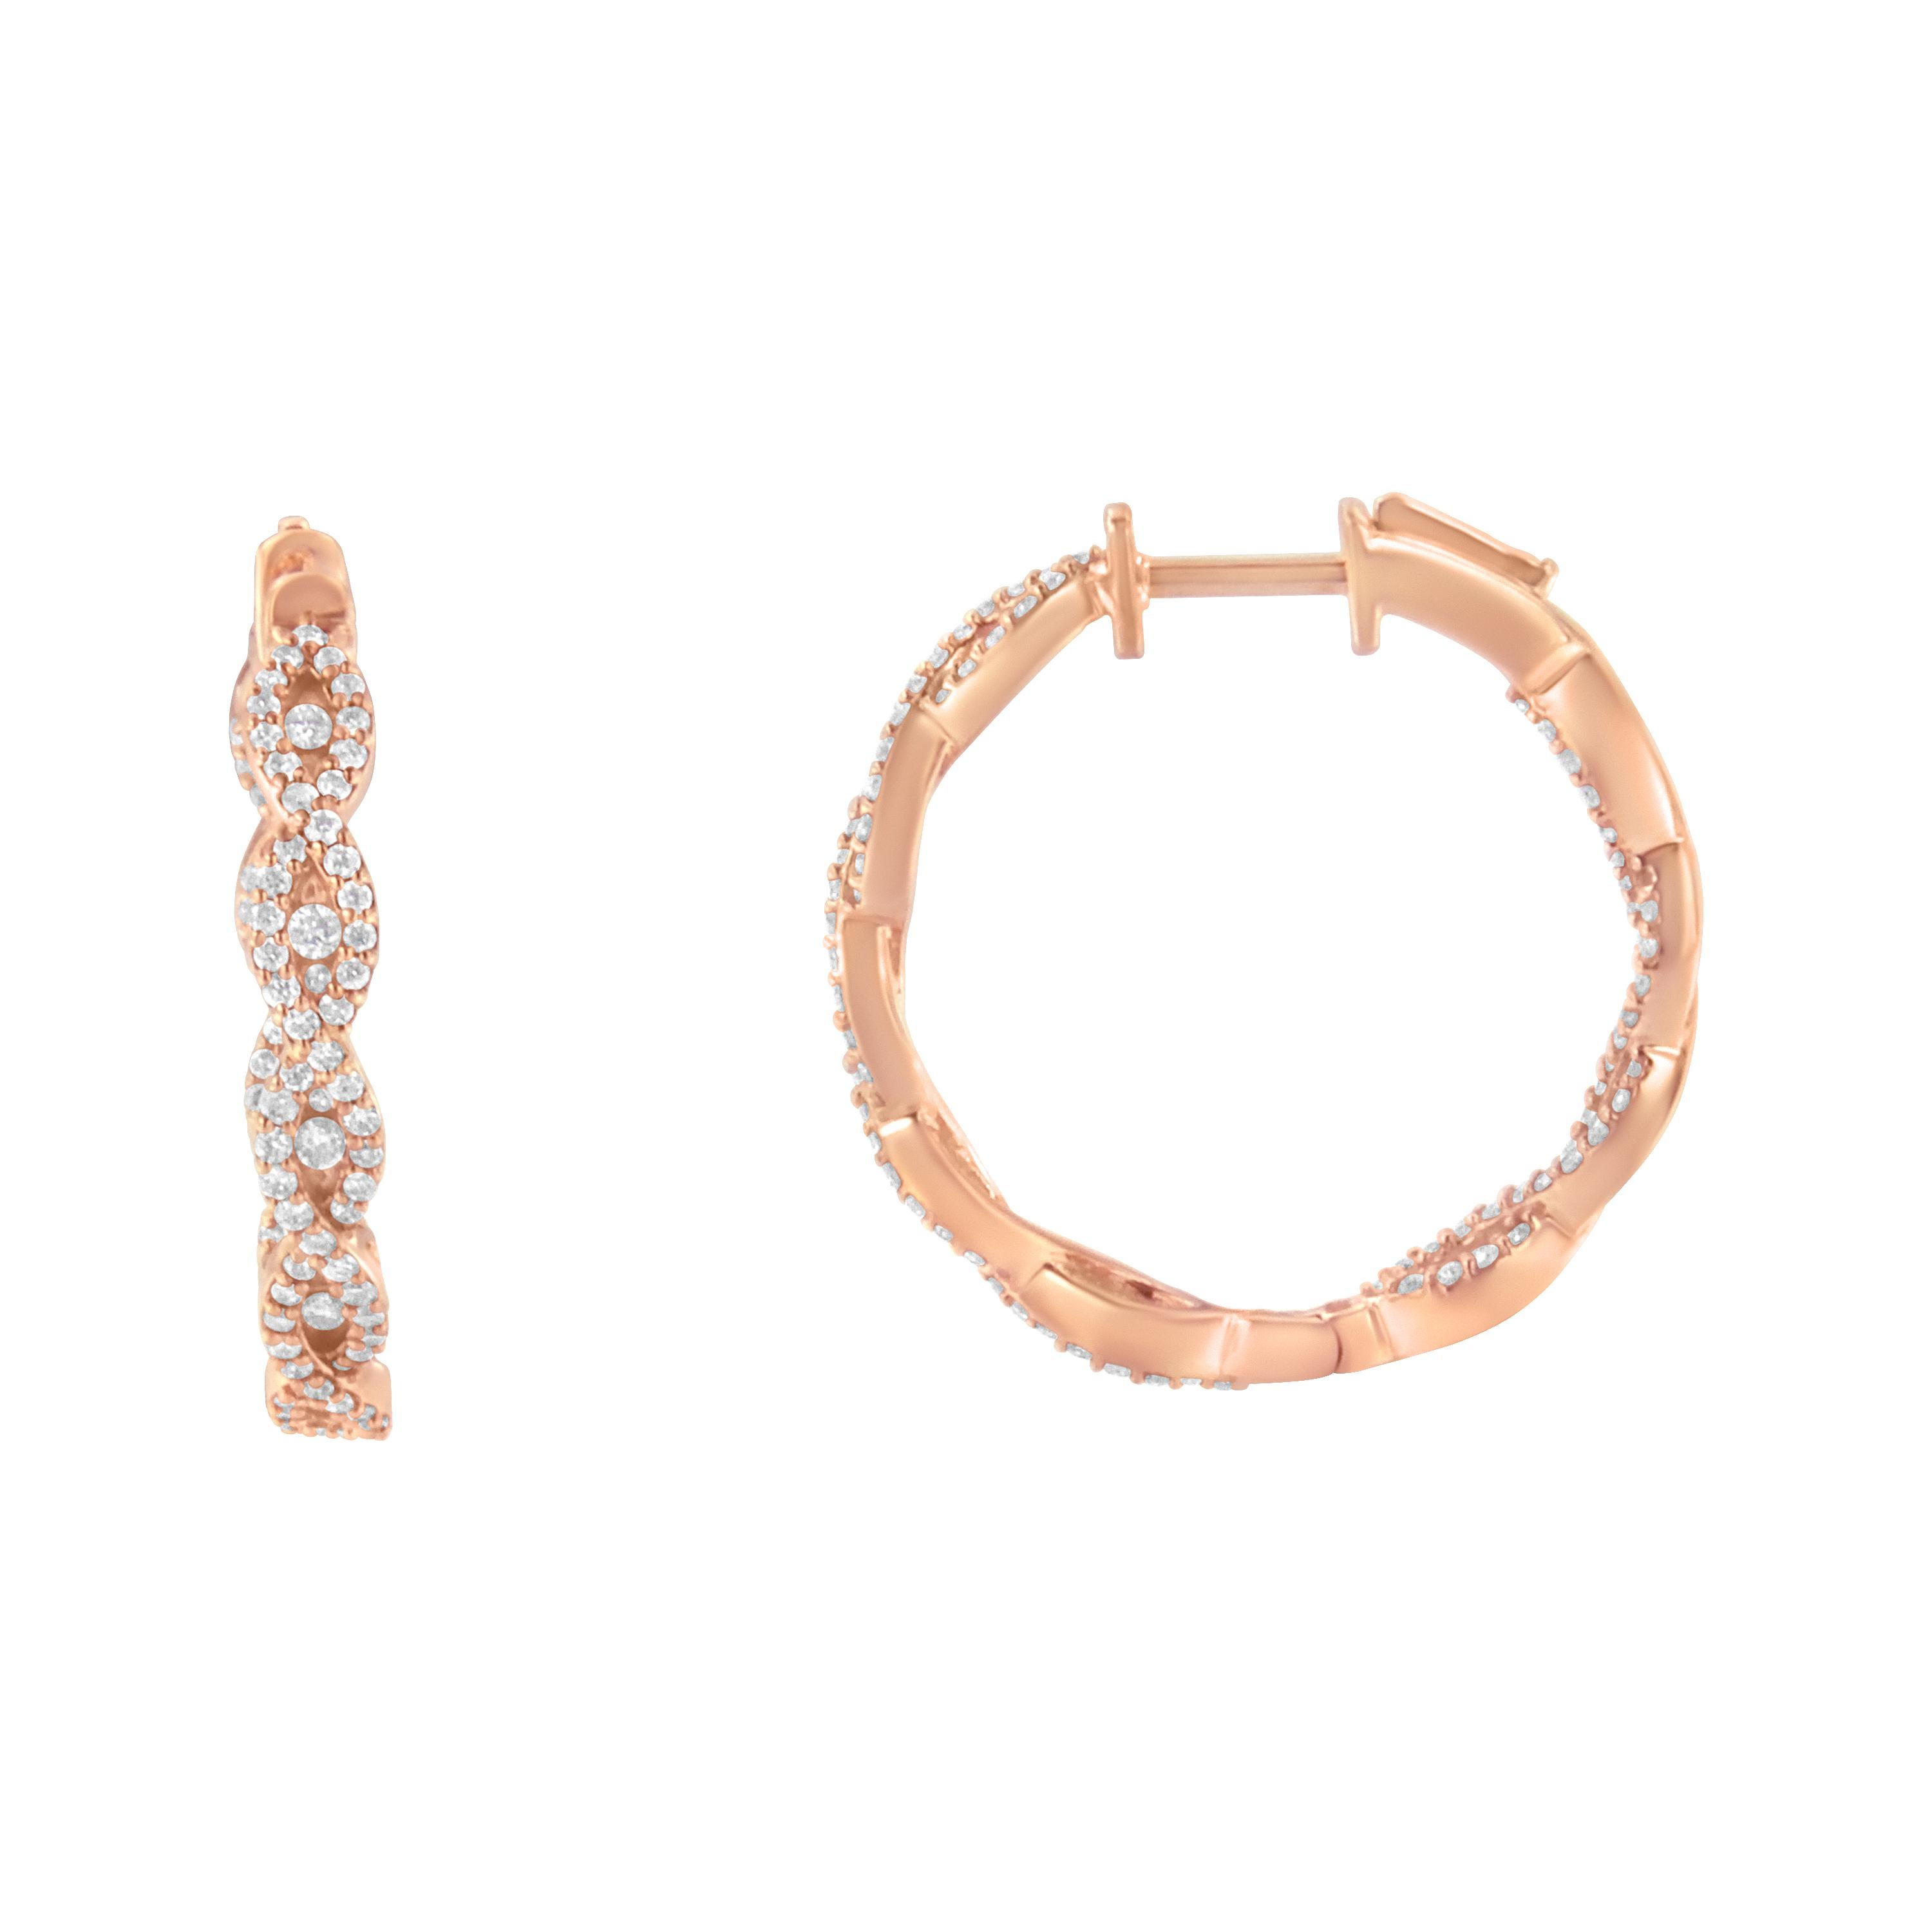 Inlaying both the front and back side of these striking 10k rose gold hoop earrings, are 1ct of brilliant round cut diamonds with lever backs that keep them securely in place. These unique design is perfect for everyday wear. 'Video Available Upon